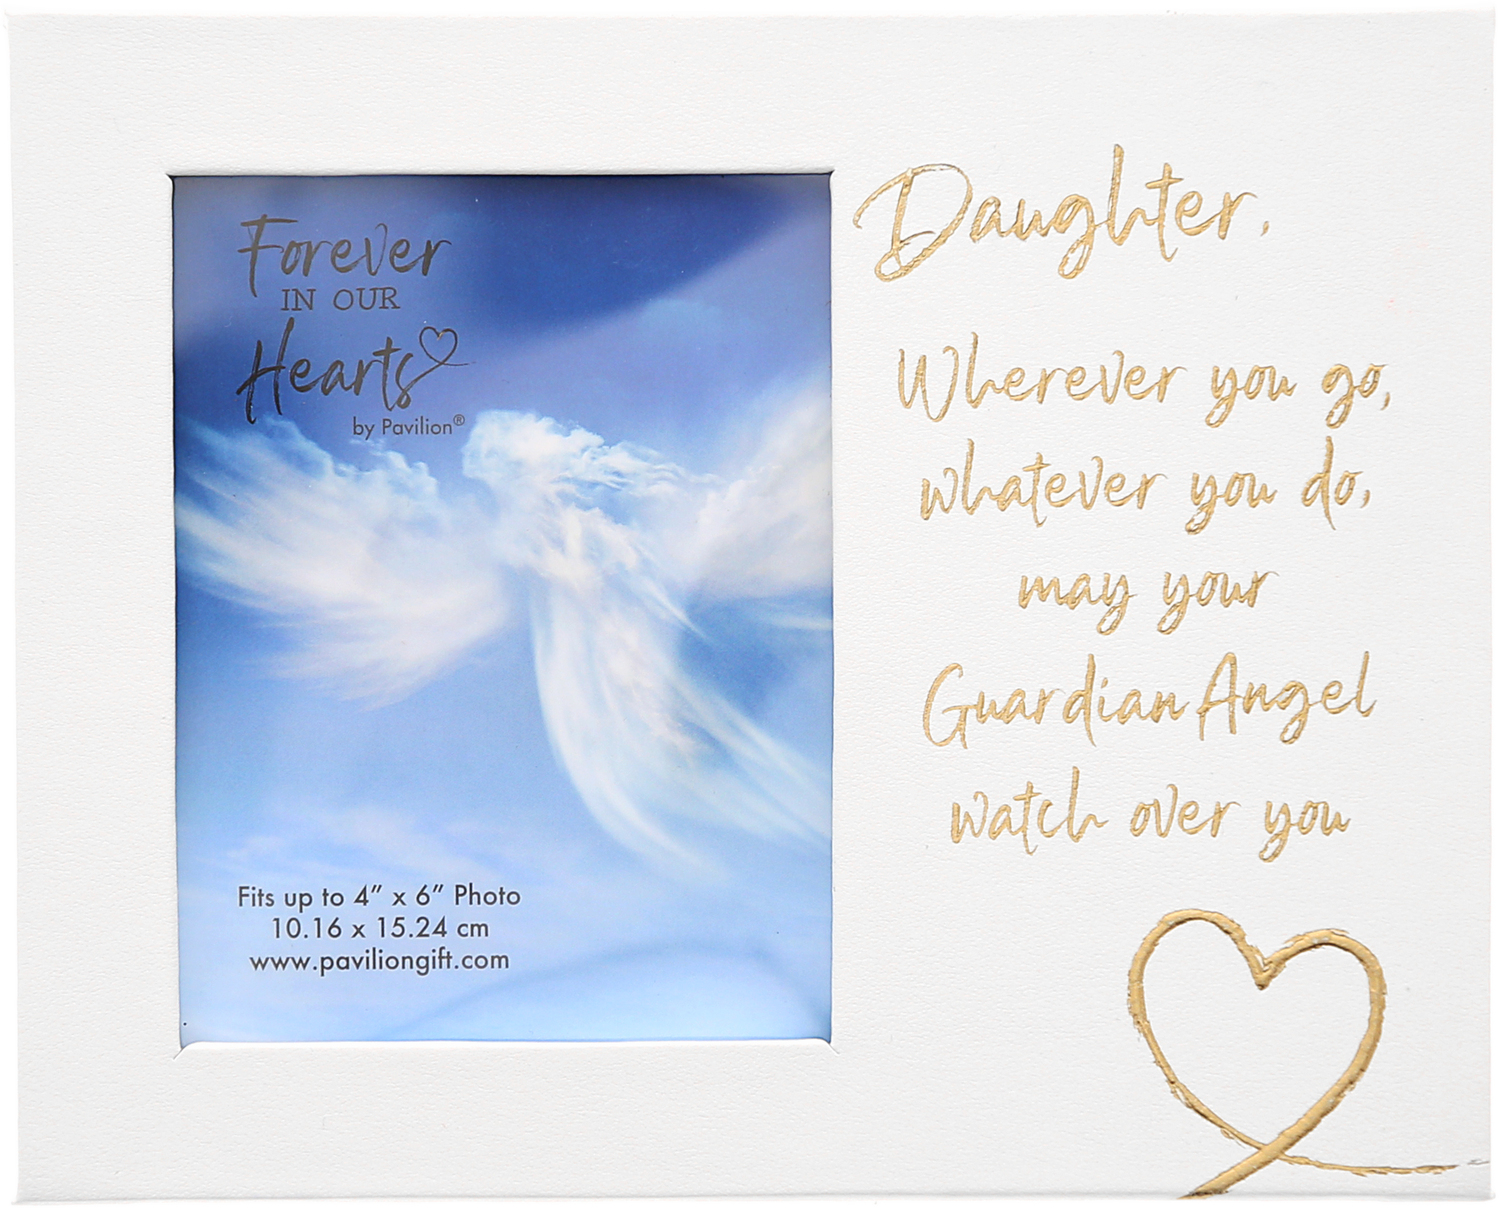 Daugther Guardian Angel by Forever in our Hearts - Daugther Guardian Angel - Visor Memorial Photo Frame
(Holds 4" x 6" Photo)